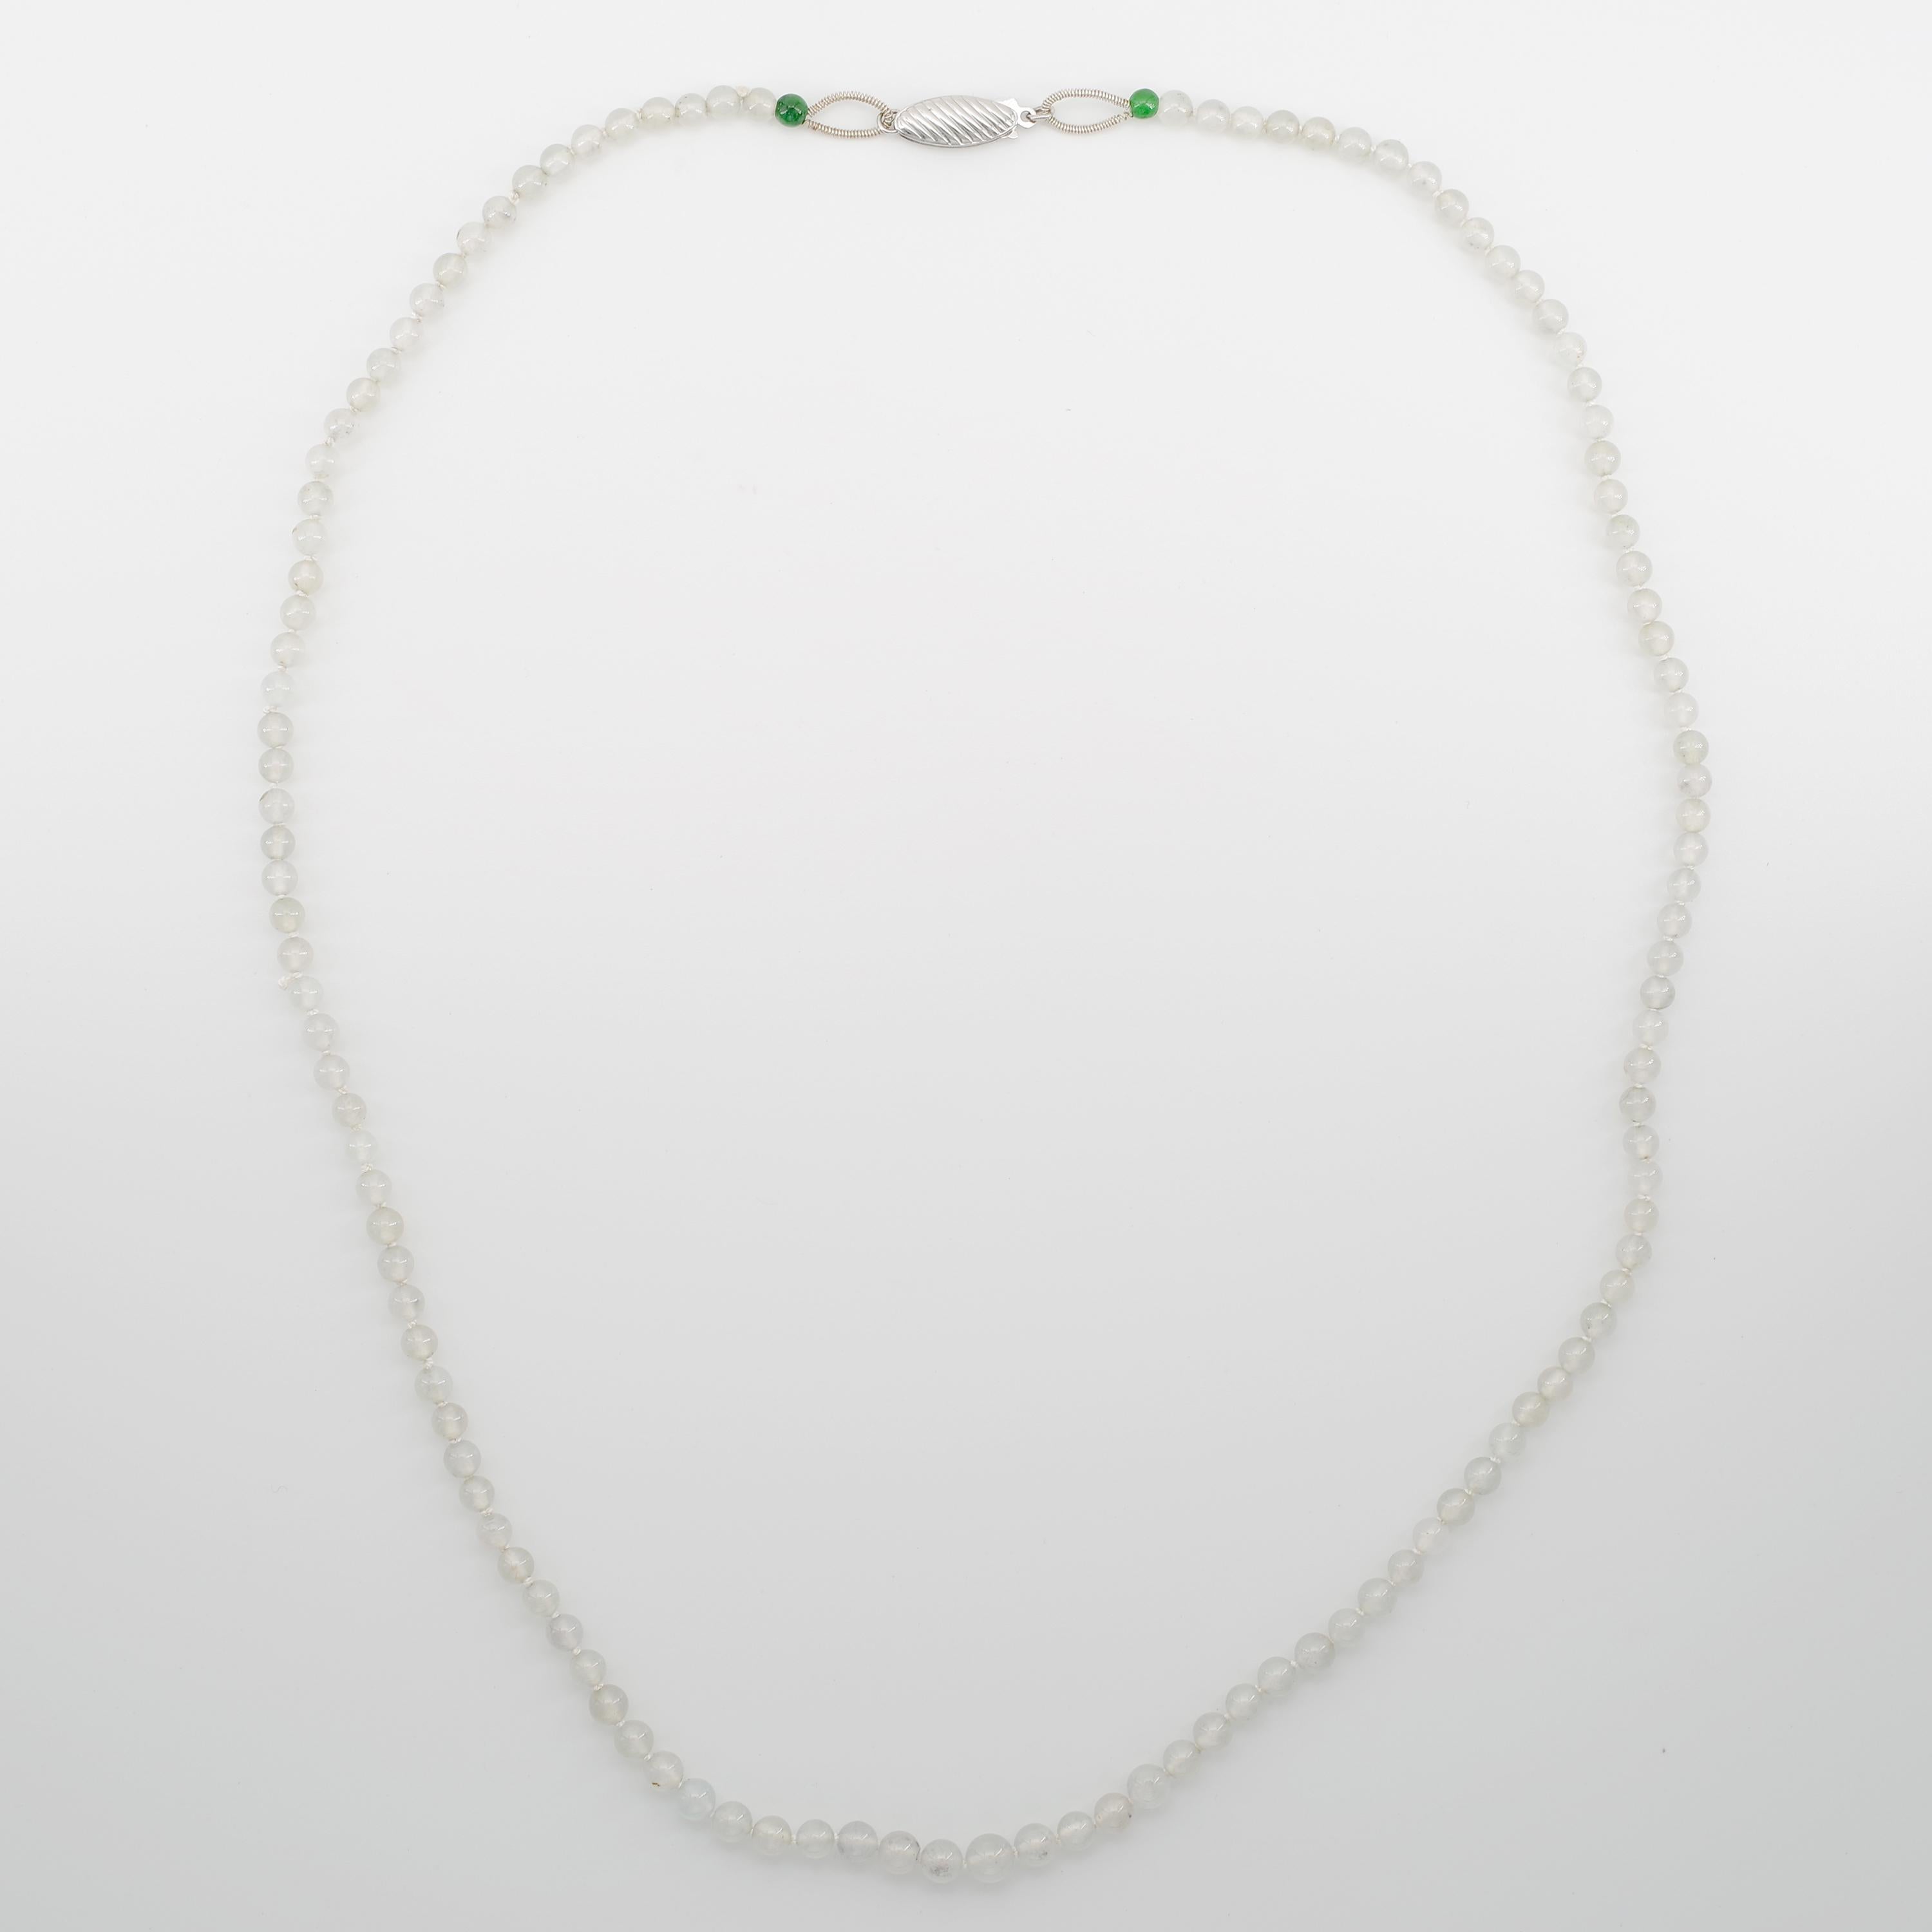 Women's or Men's Certified Untreated Glassy and Imperial Jade Necklace with Platinum Clasp